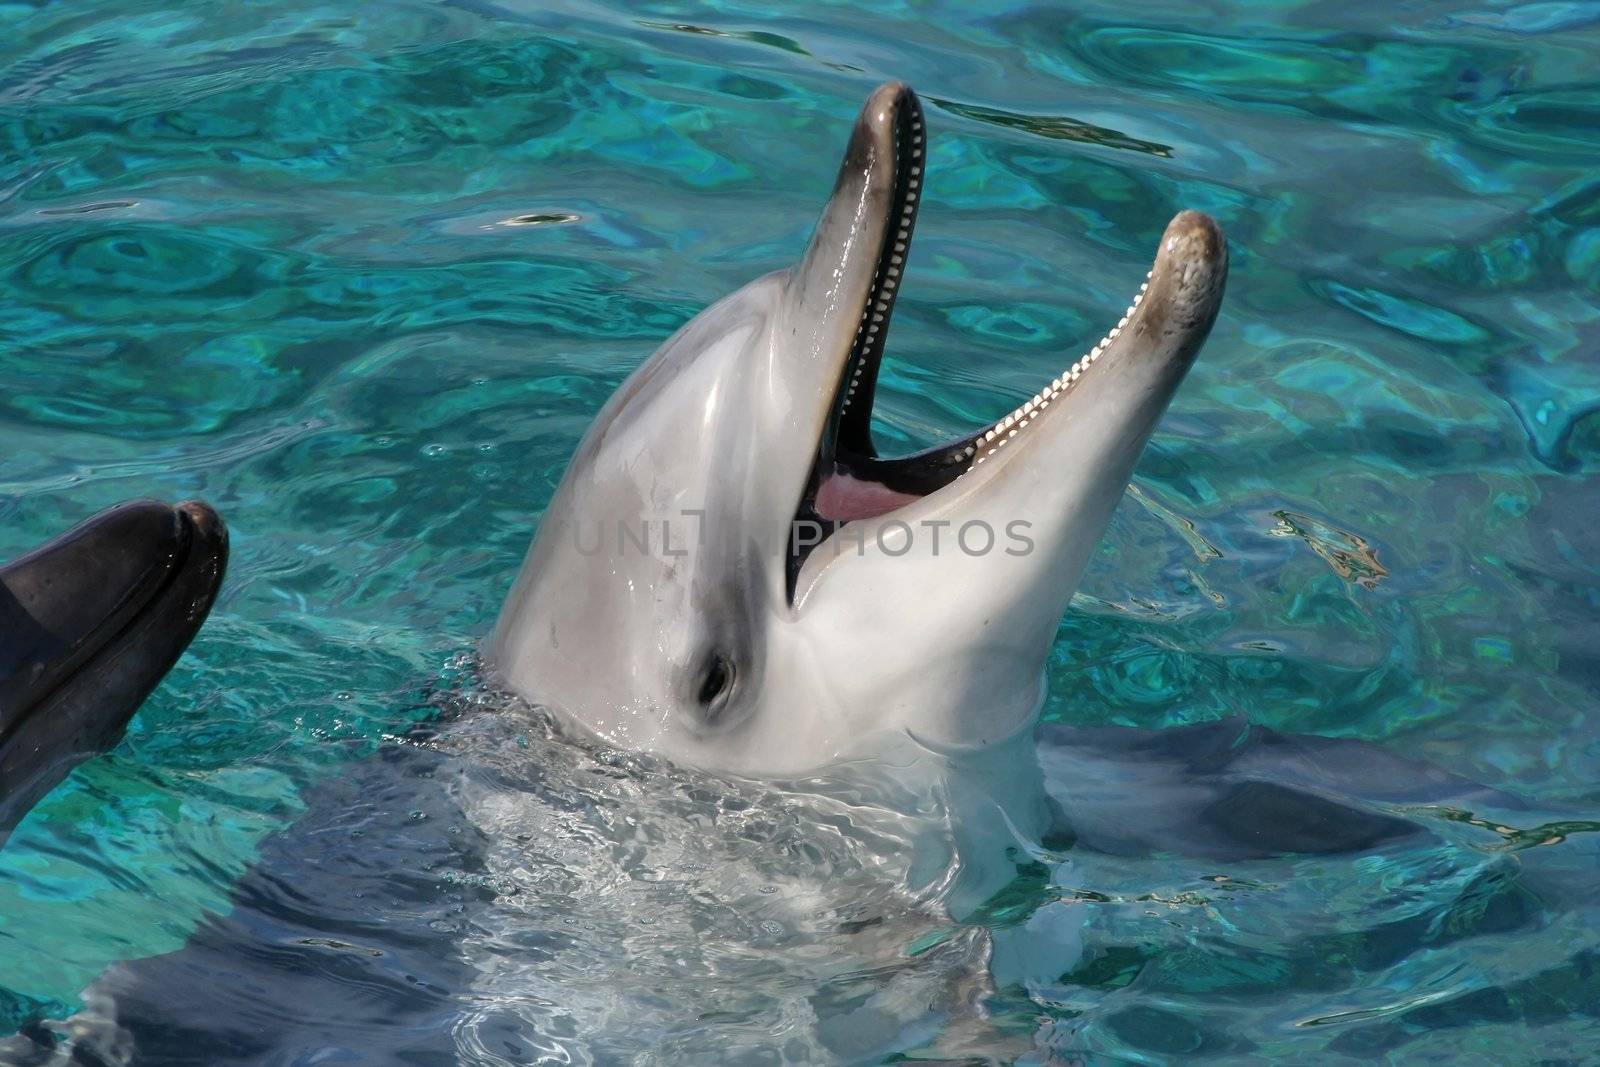 Portrait of a smiling Bottlenose dolphin in the blue water